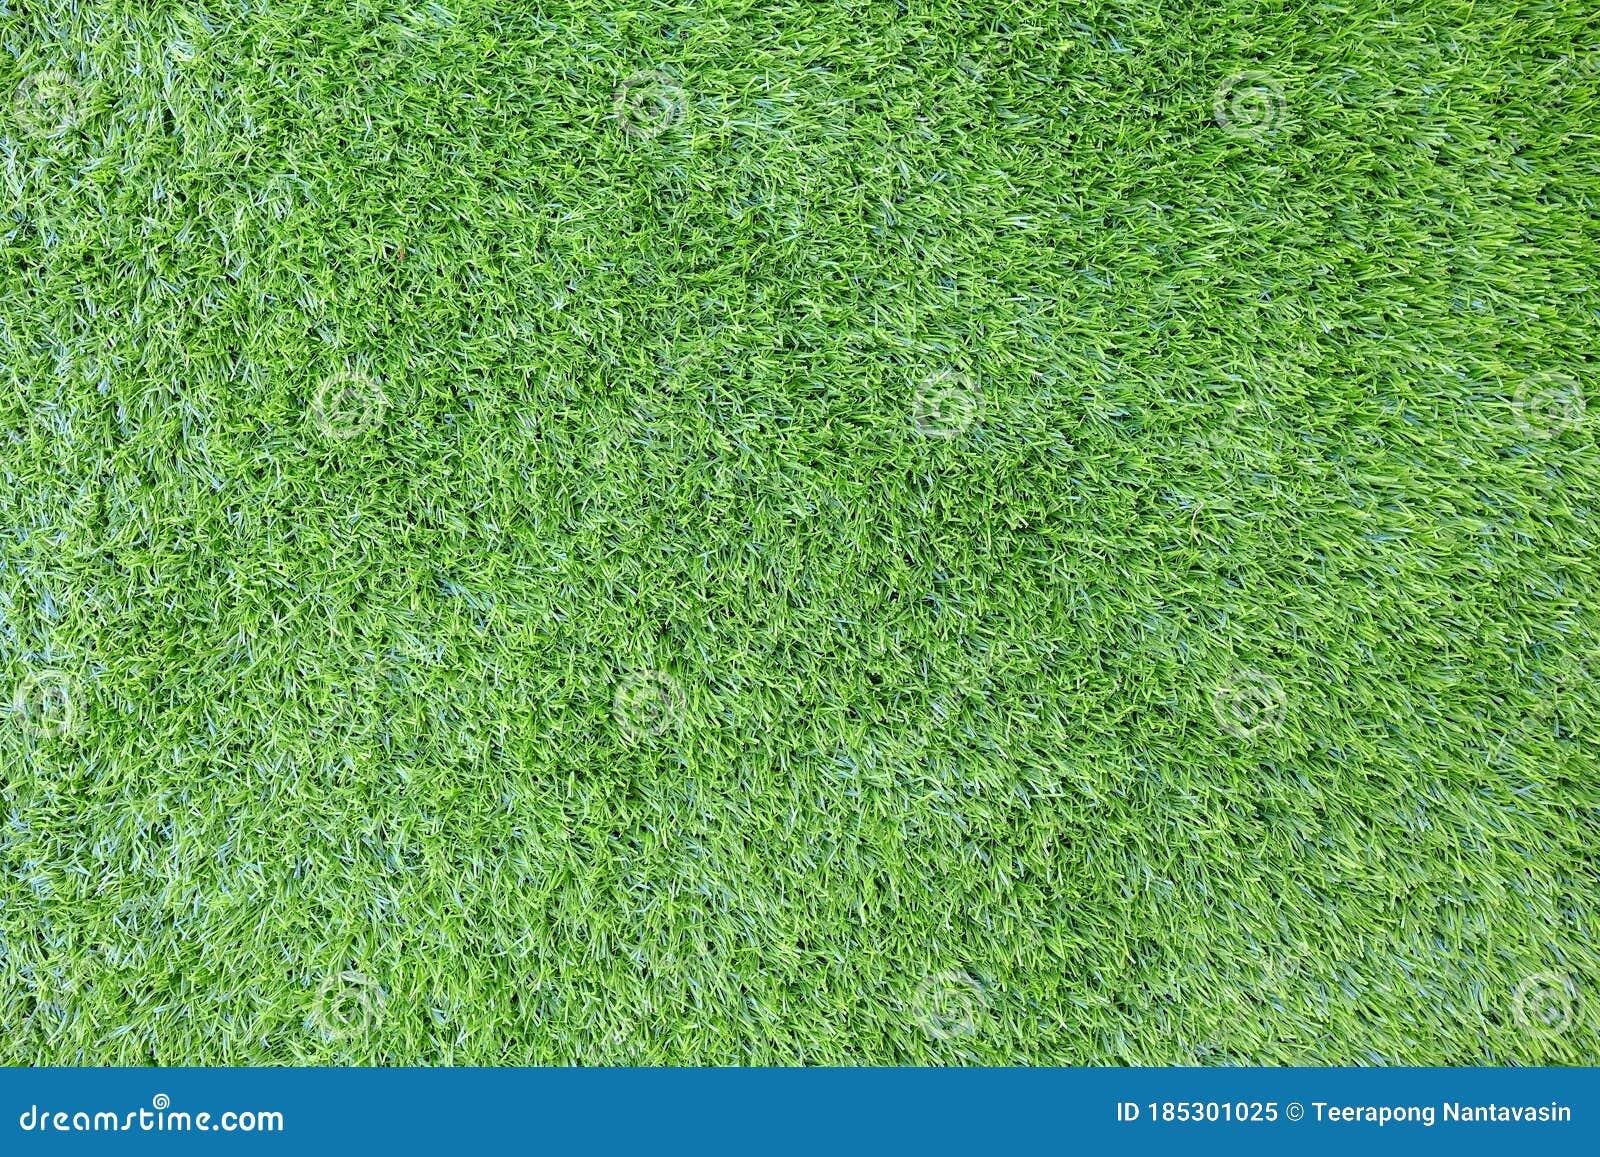 Green Artificial Grass Background, Suitable for Wallpaper, Backdrop,  Mockup, and Product Presentation. Stock Image - Image of ground, astroturf:  185301025